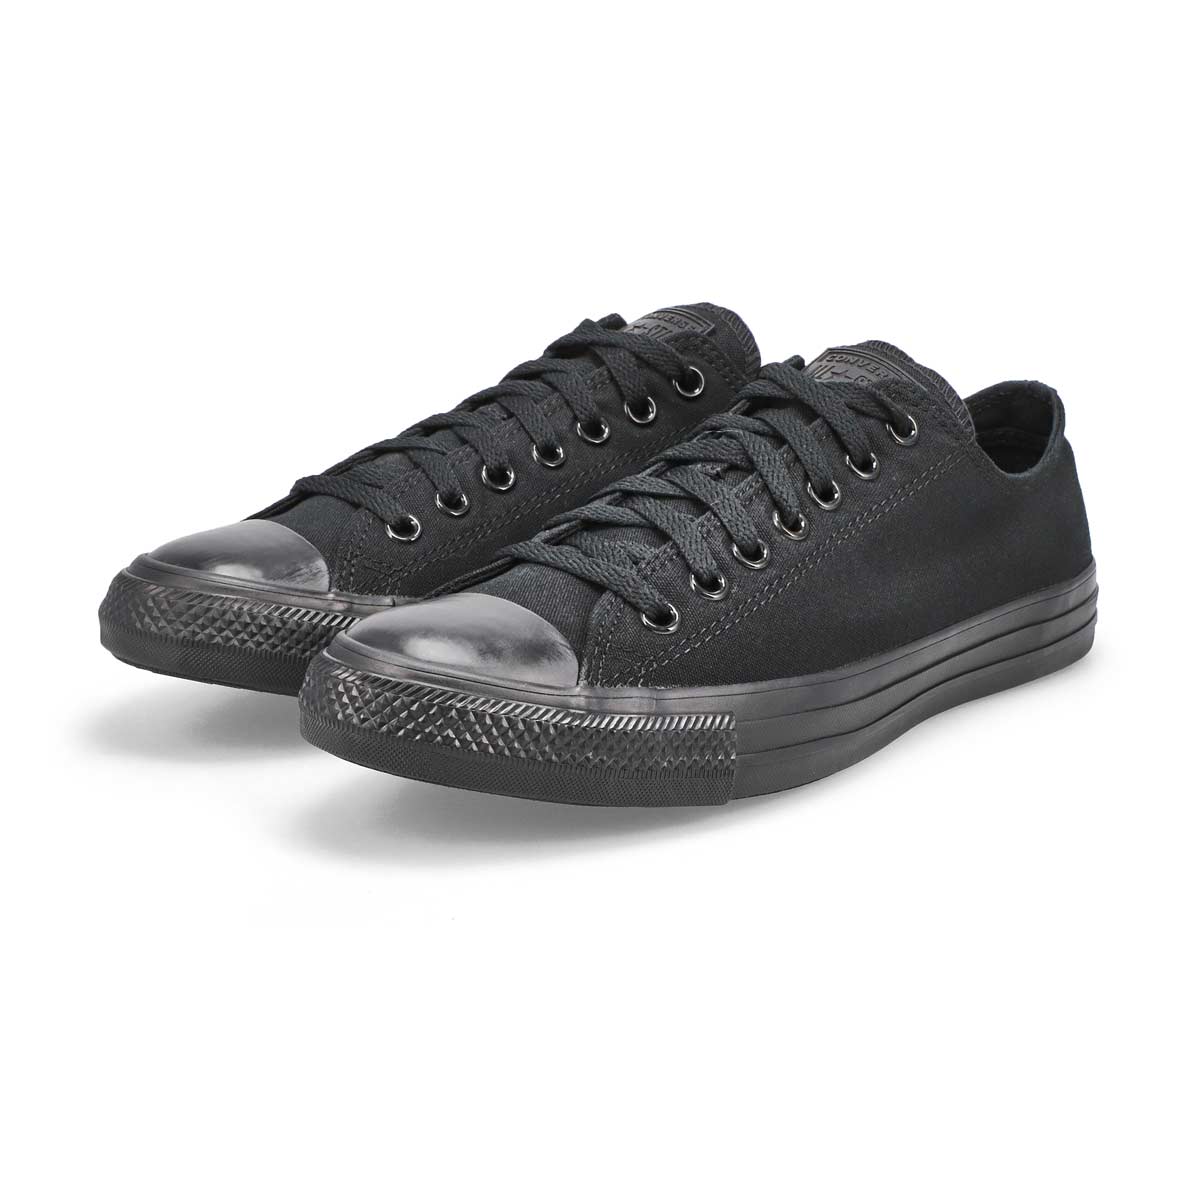 Converse Men's Chuck Taylor All Star Leather 